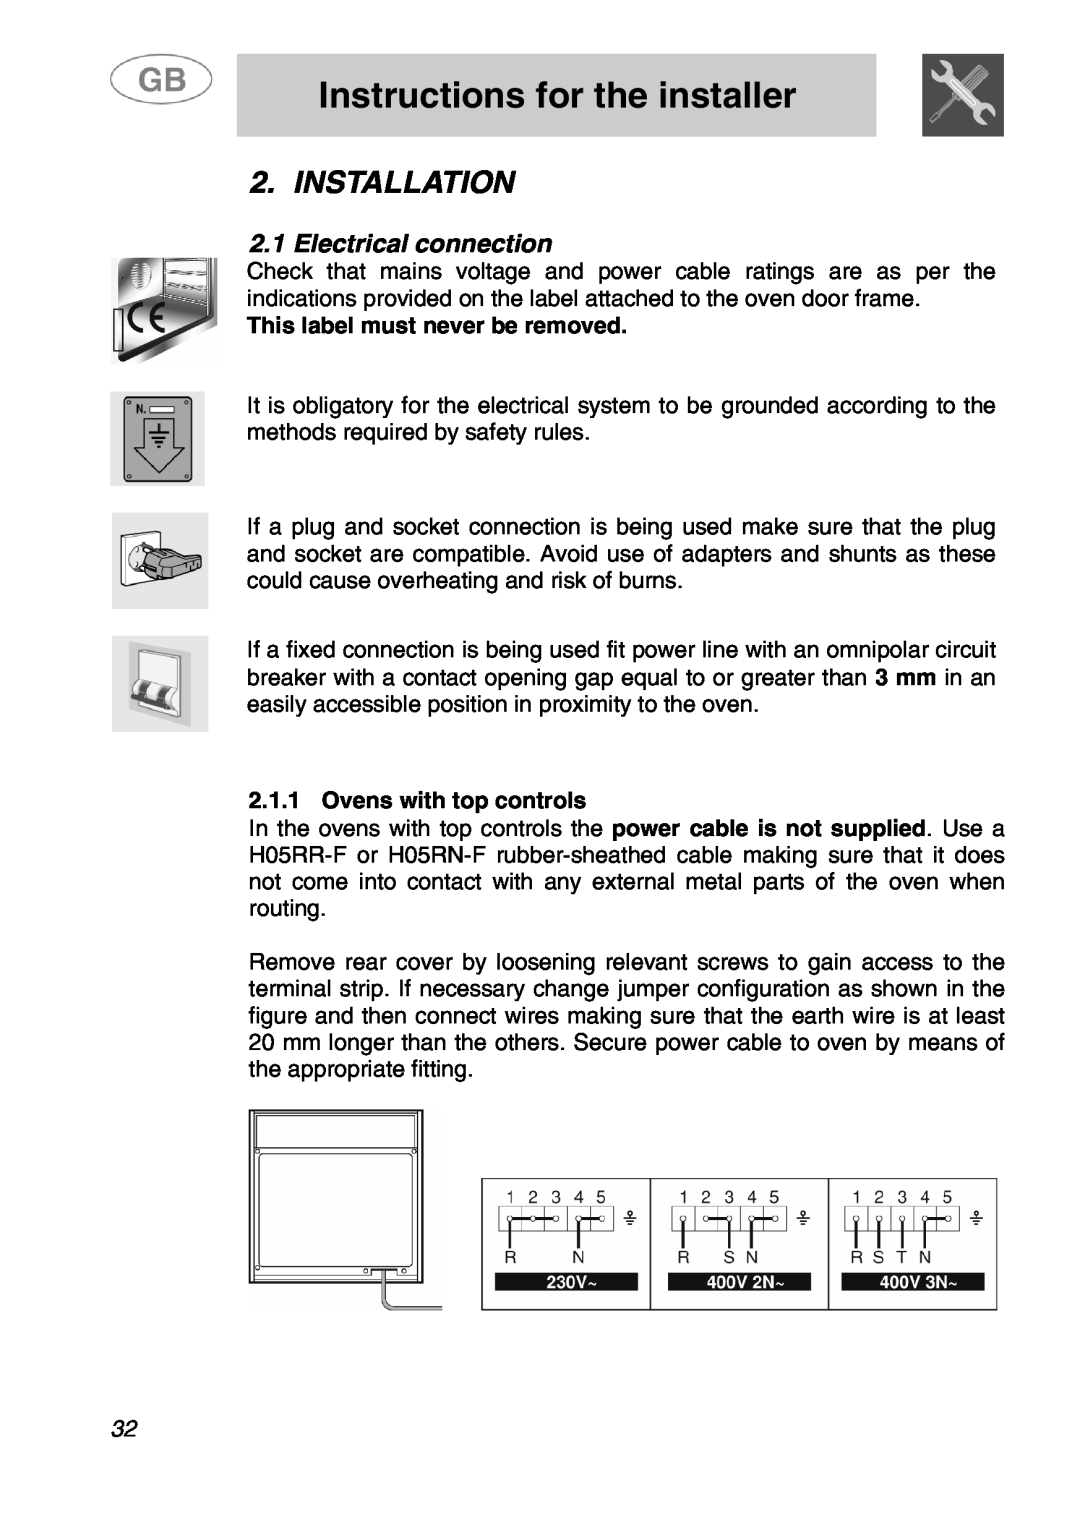 Smeg SA280X manual Instructions for the installer, Installation, 2.1Electrical connection, This label must never be removed 